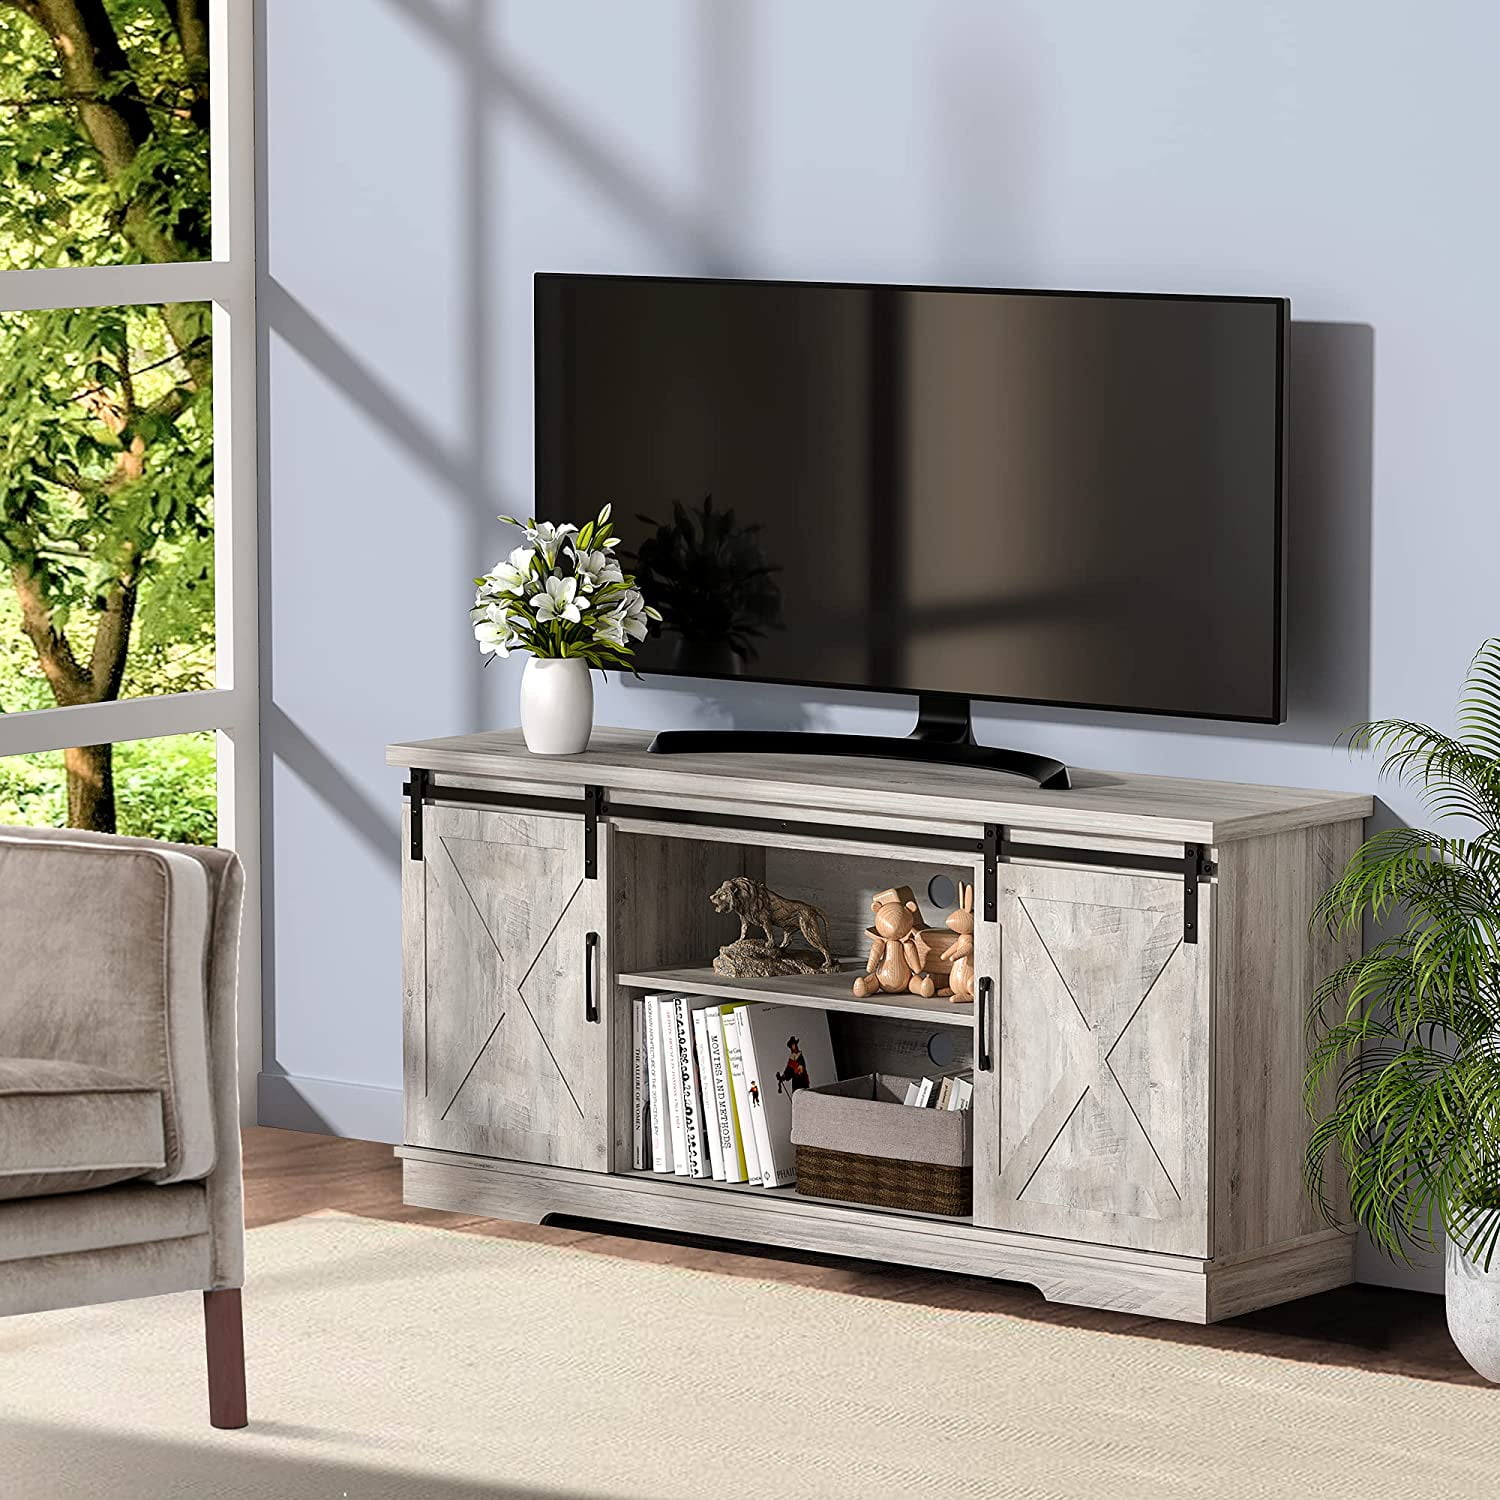 TV Stand for 65 Inch Tv, 58 Inch Entertainment Center Wood TV Cabinet ...